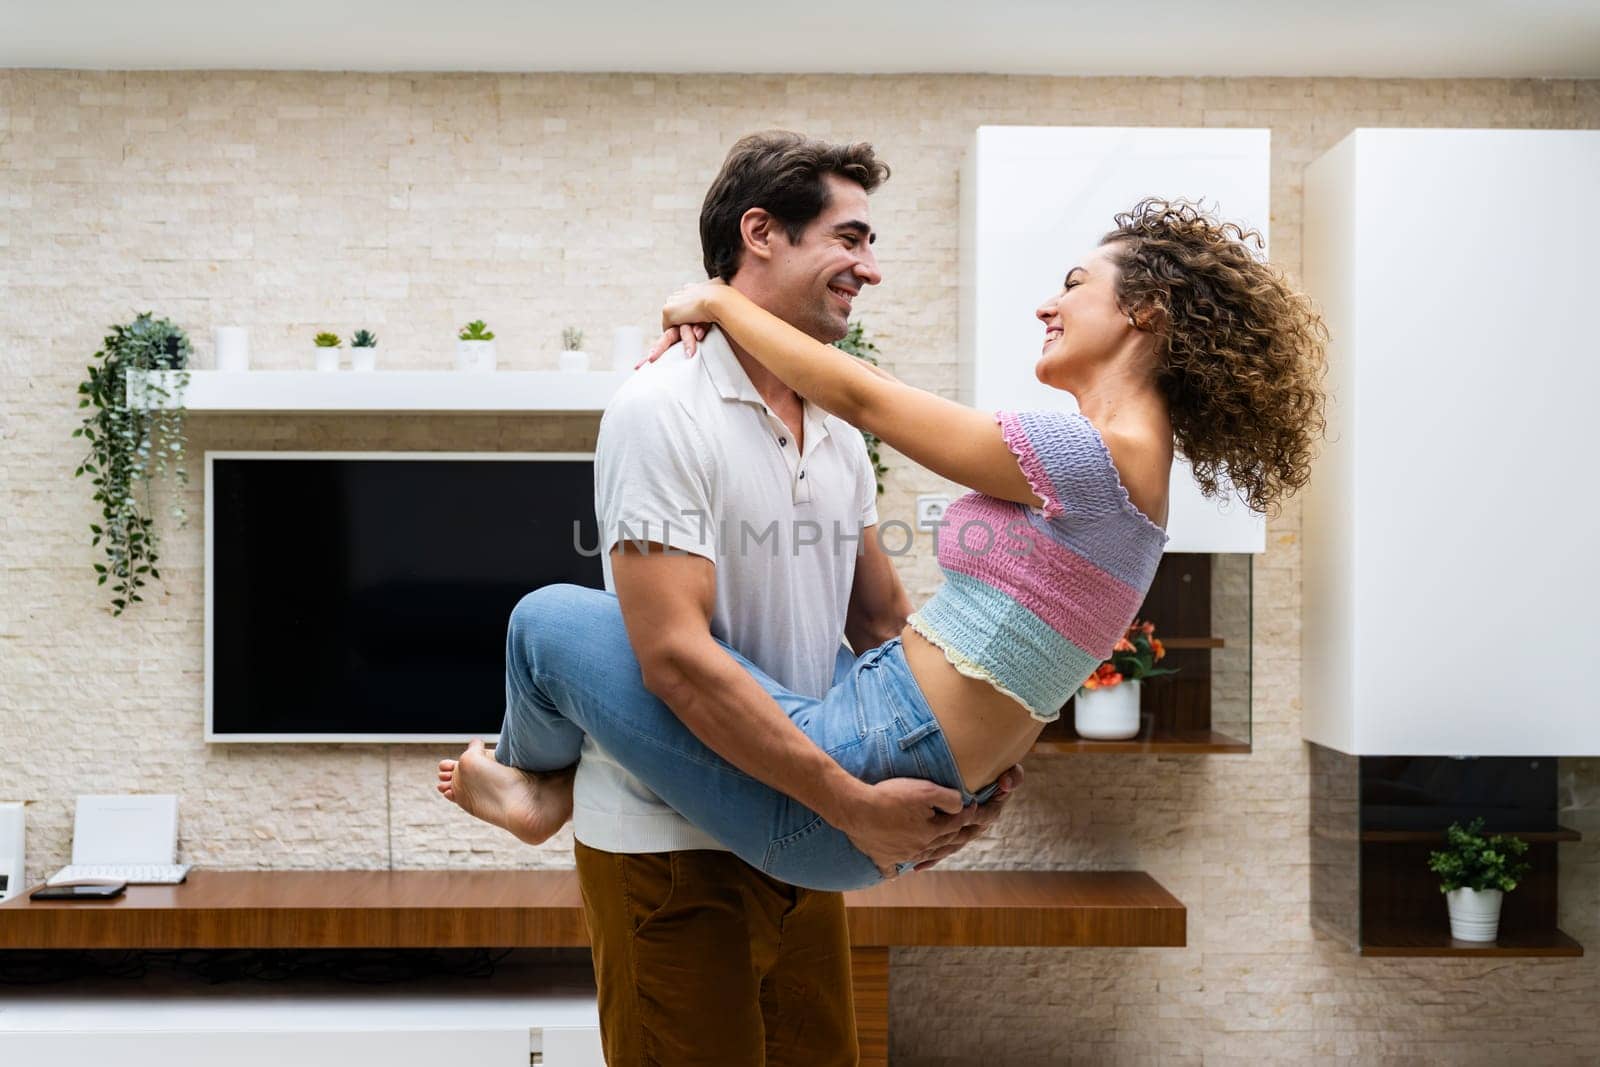 Smiling couple embracing in modern living room near TV by javiindy